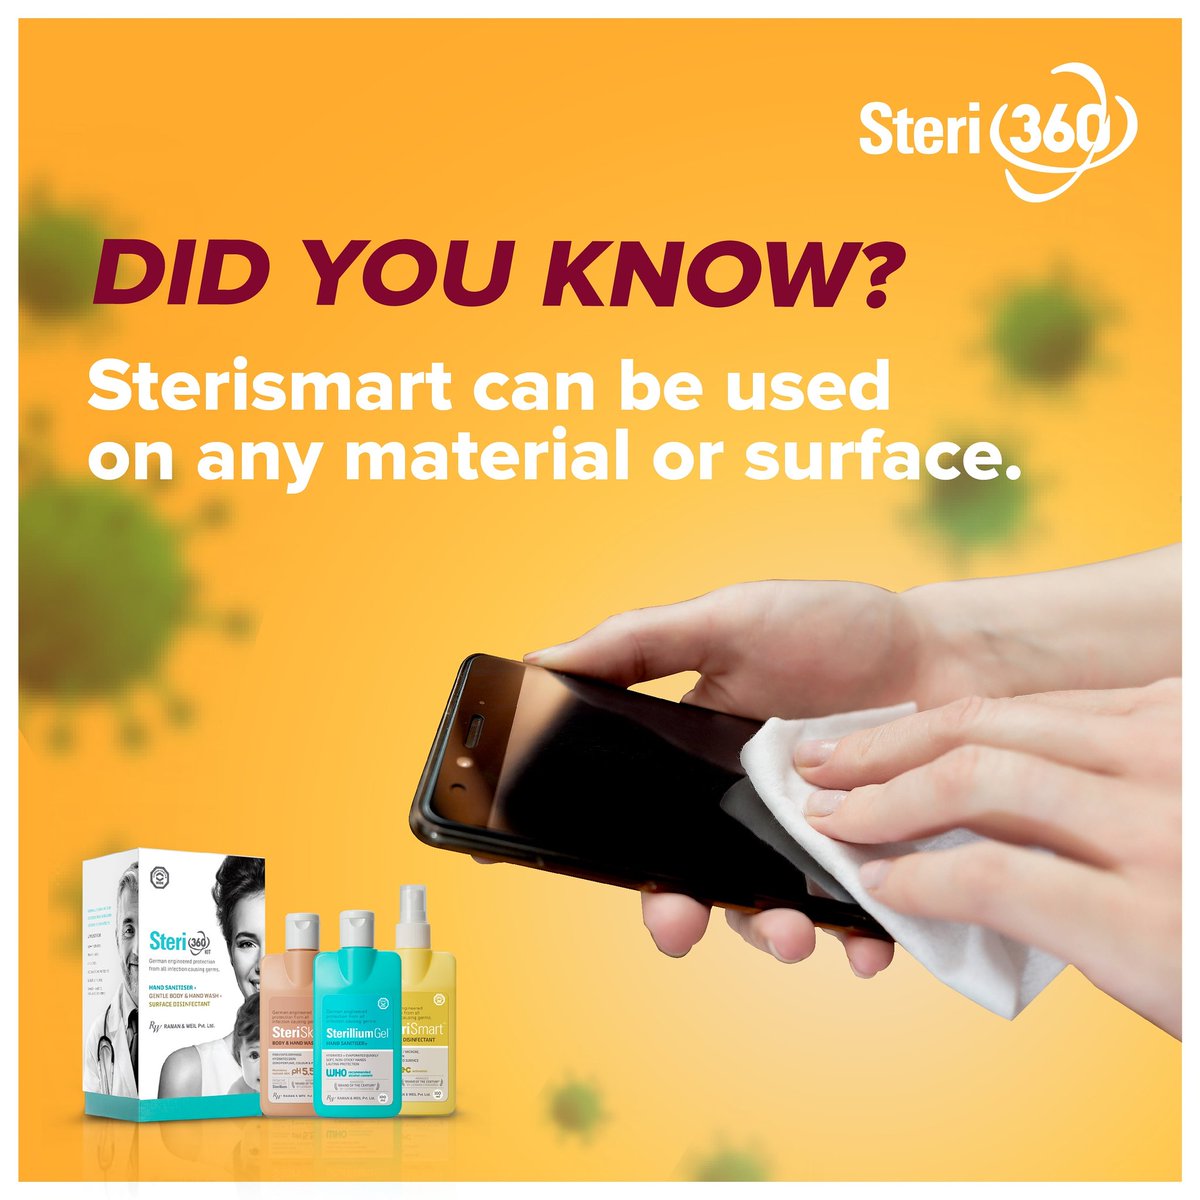 The SteriSmart surface disinfection can be sprayed on any surface for perfect disinfection, it’s quick action eliminates bacteria in less than 25 seconds and does not damage any surface.

#Steri360 #touch #care #Wash #Disinfect #science #amazon #flipkart #firstcryindia